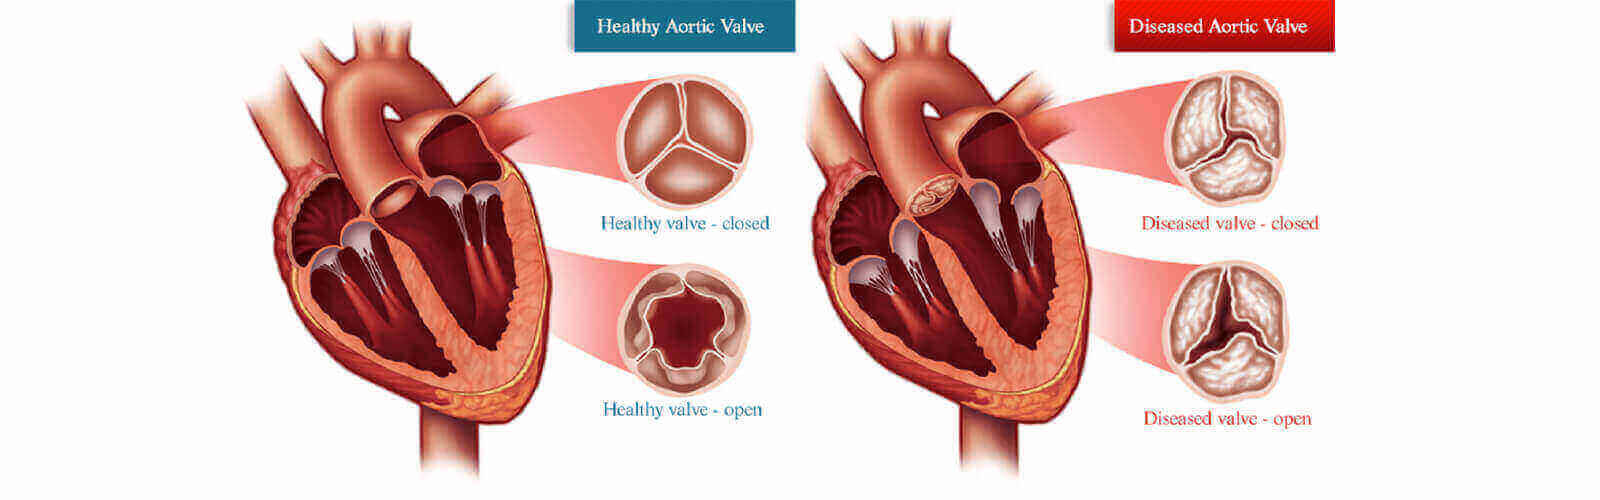 Heart Valve Replacement Surgery in Lesotho